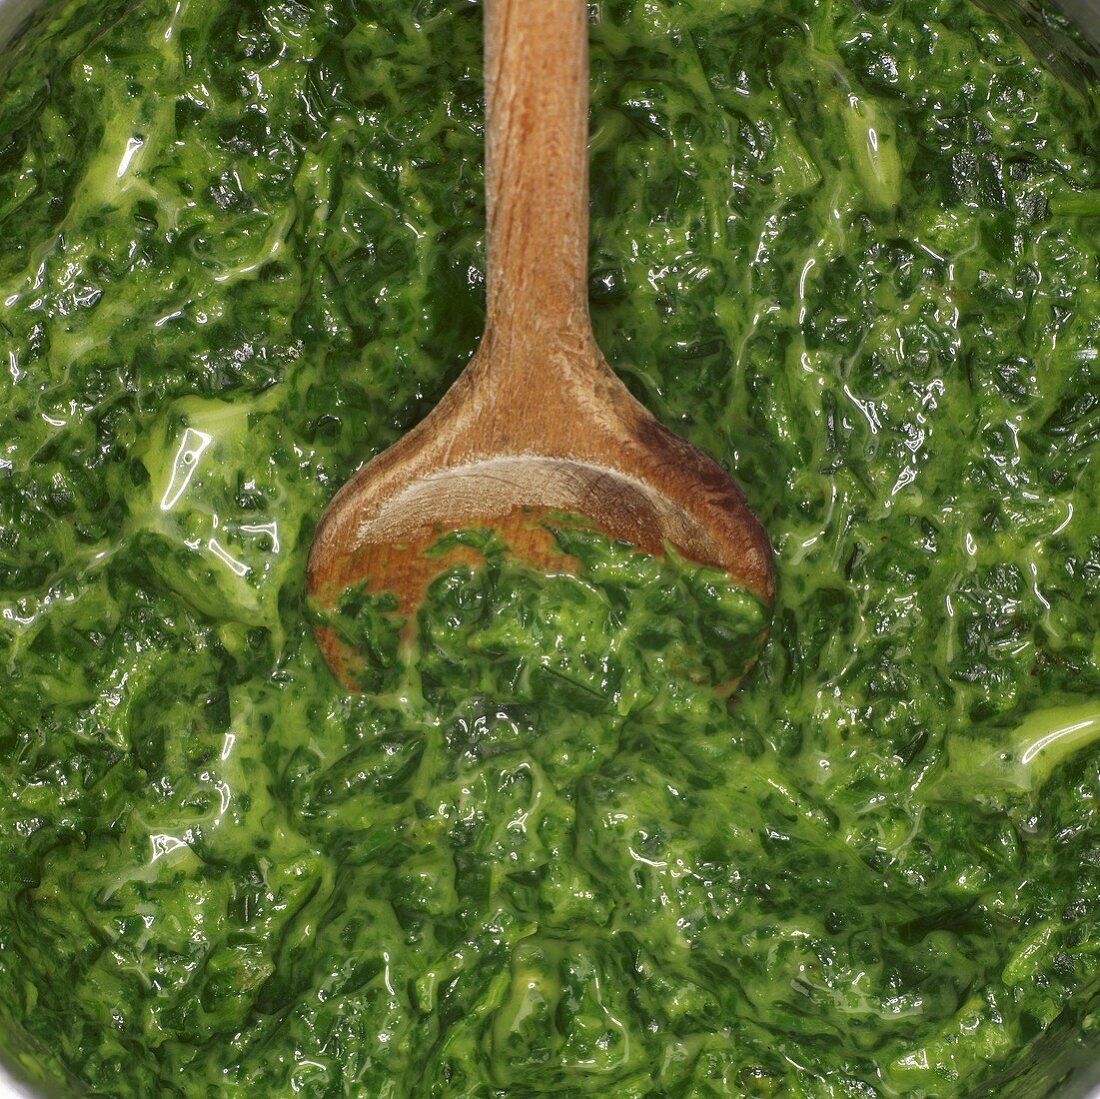 Spinach with wooden spoon (close-up)